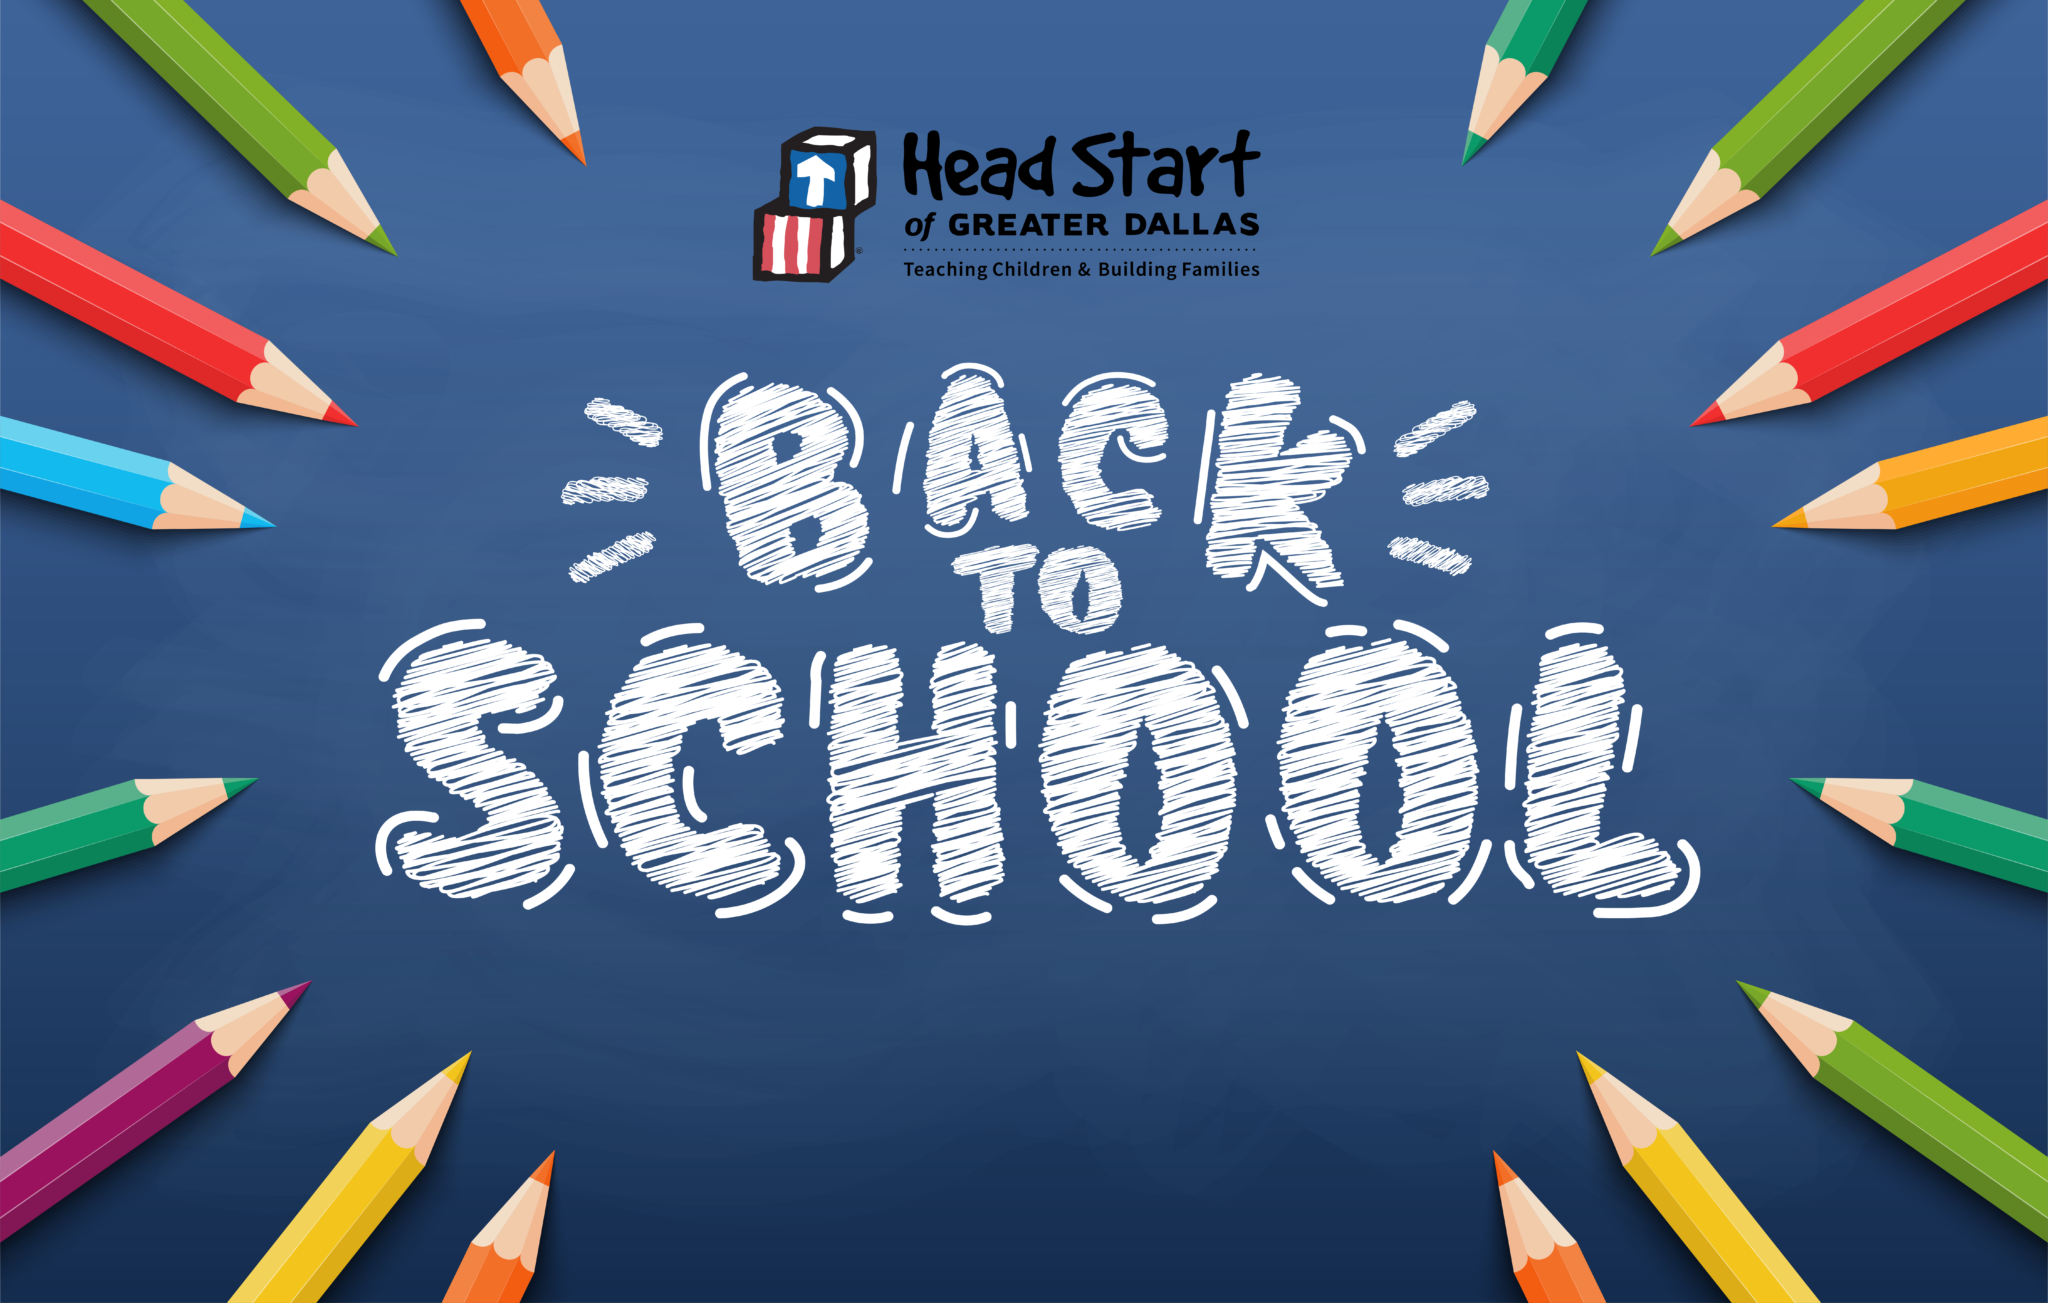 First Day of School August 15, 2022! Head Start of Greater Dallas